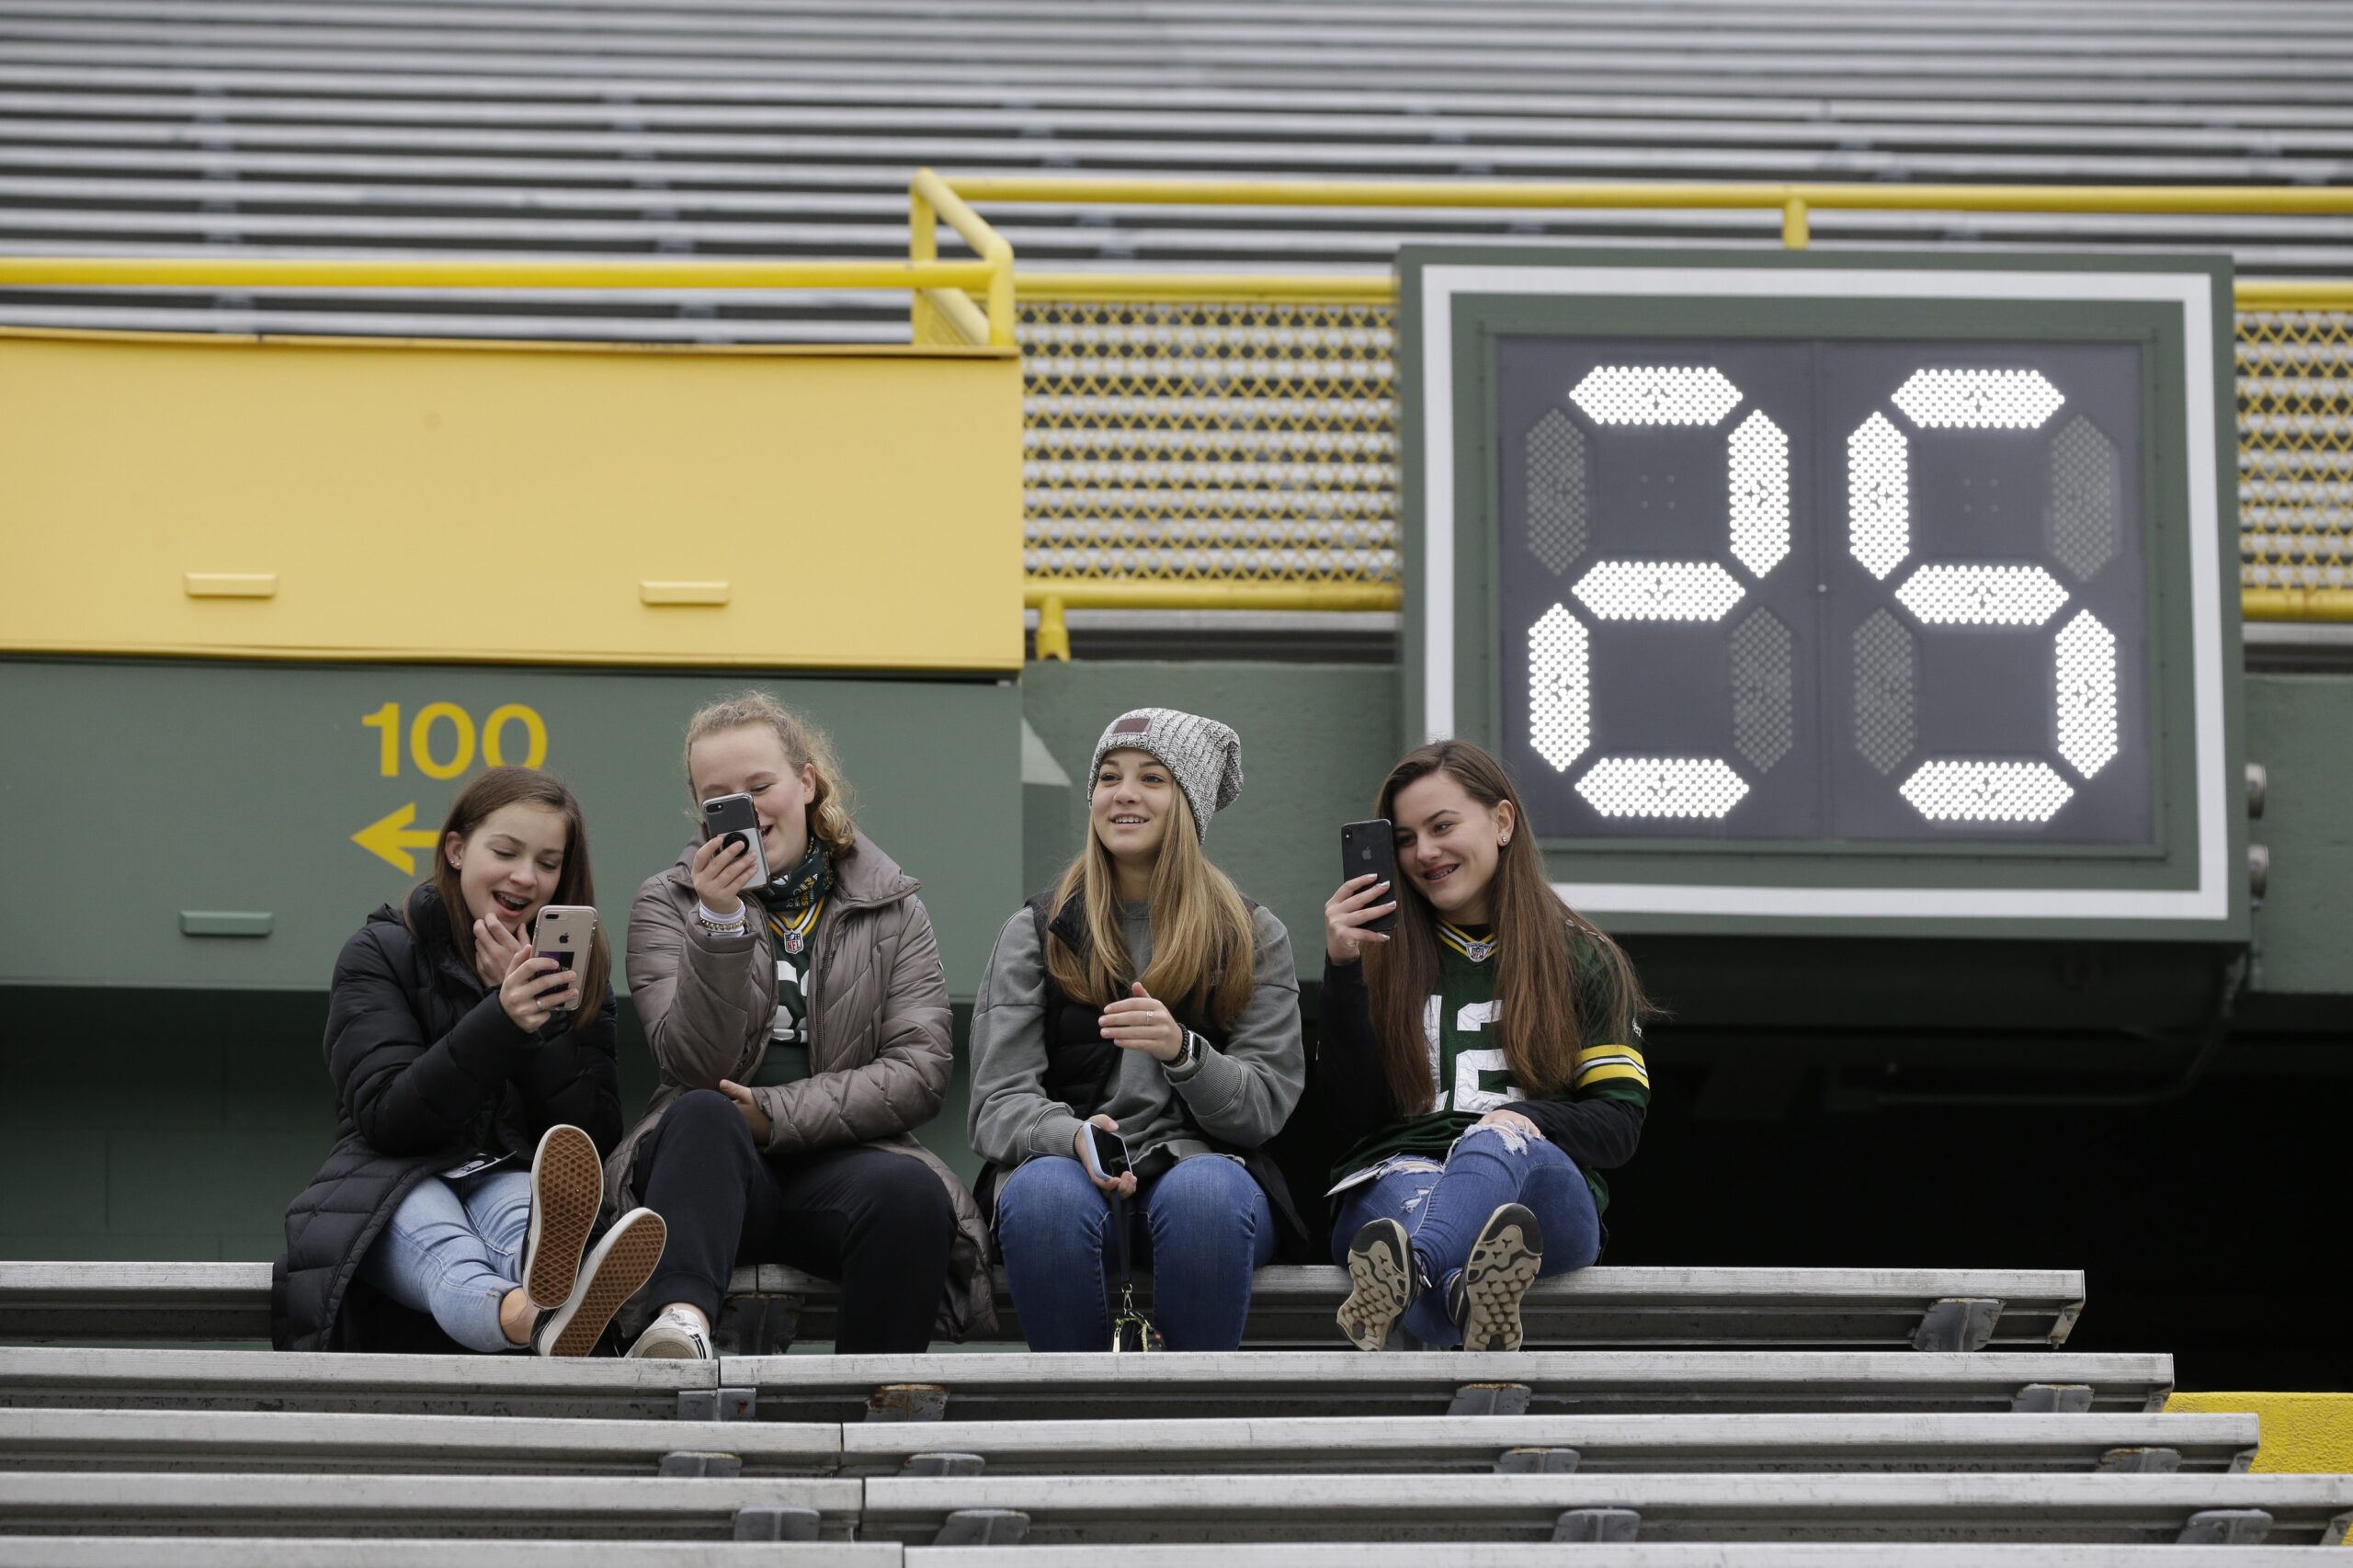 Fans sit in the stands at Lambeau Field